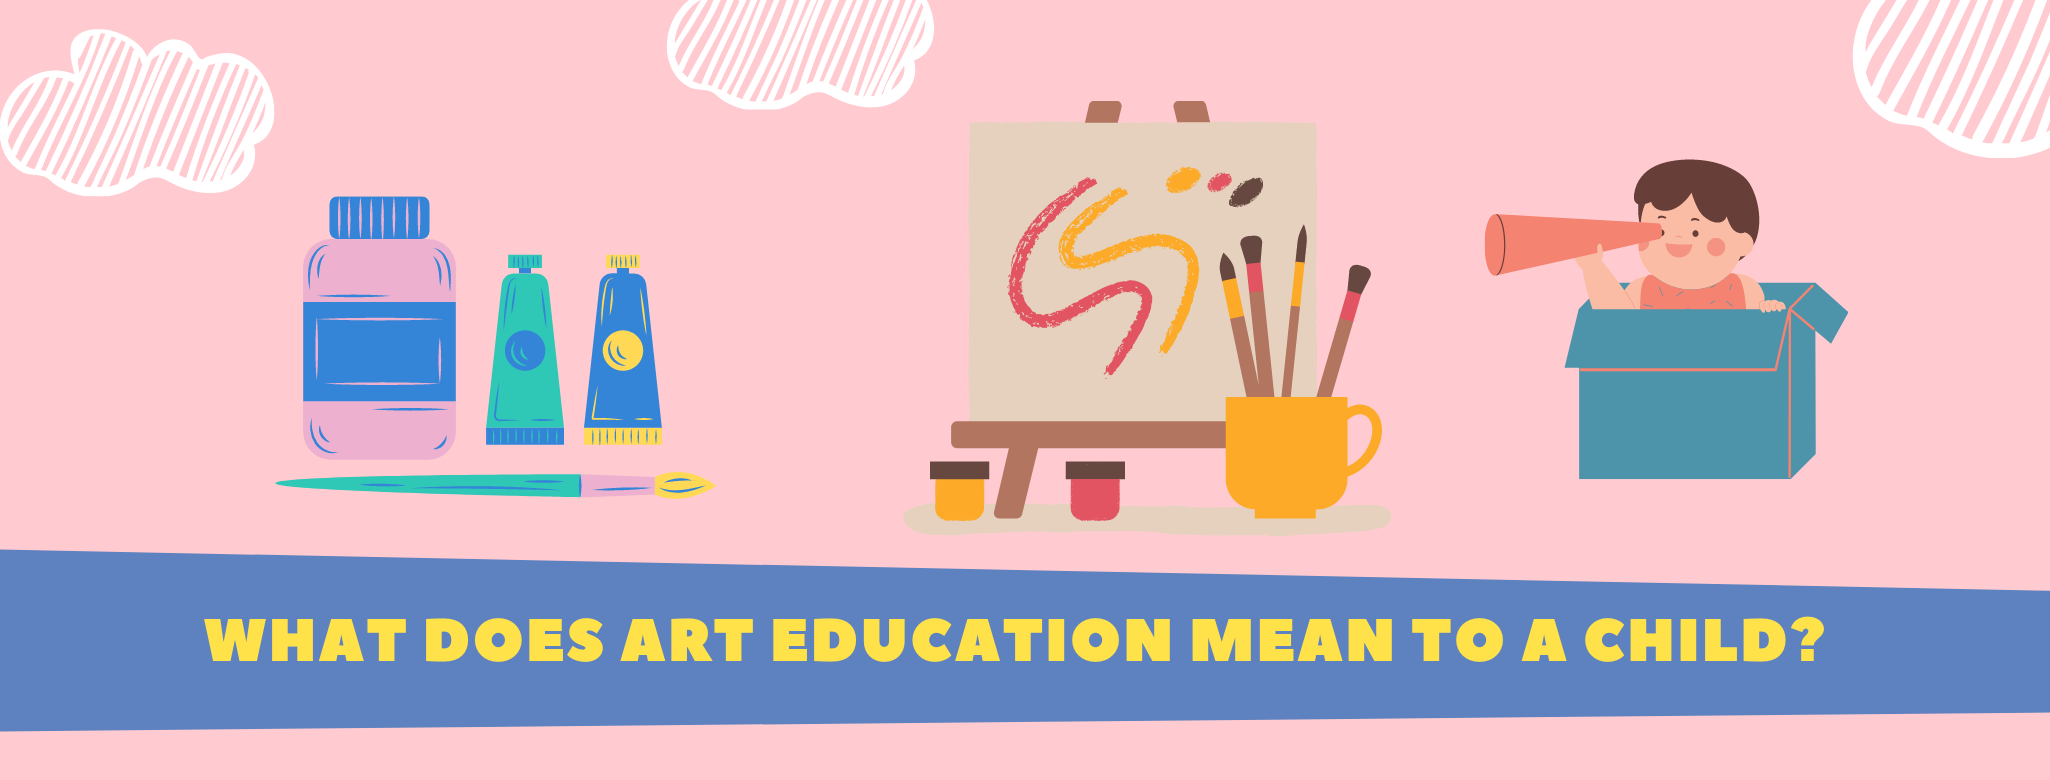 What does art education mean to a child